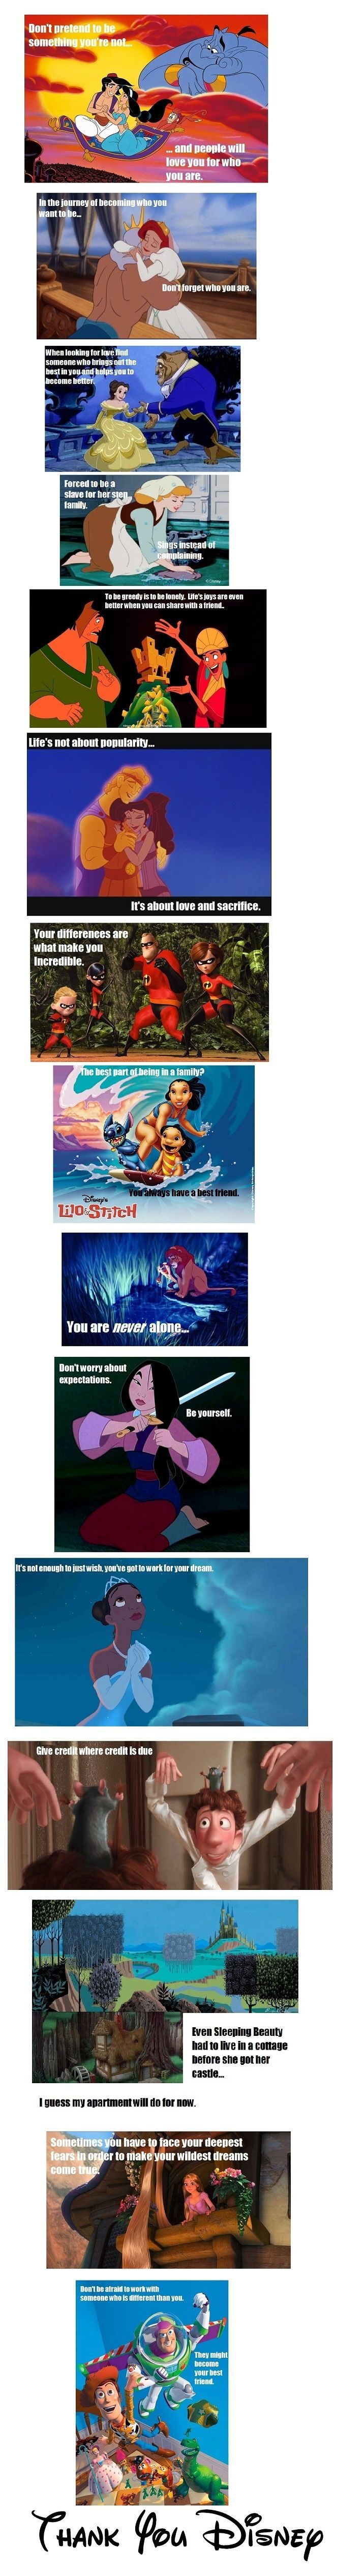 Life lessons from Disney – This almost made me cry.